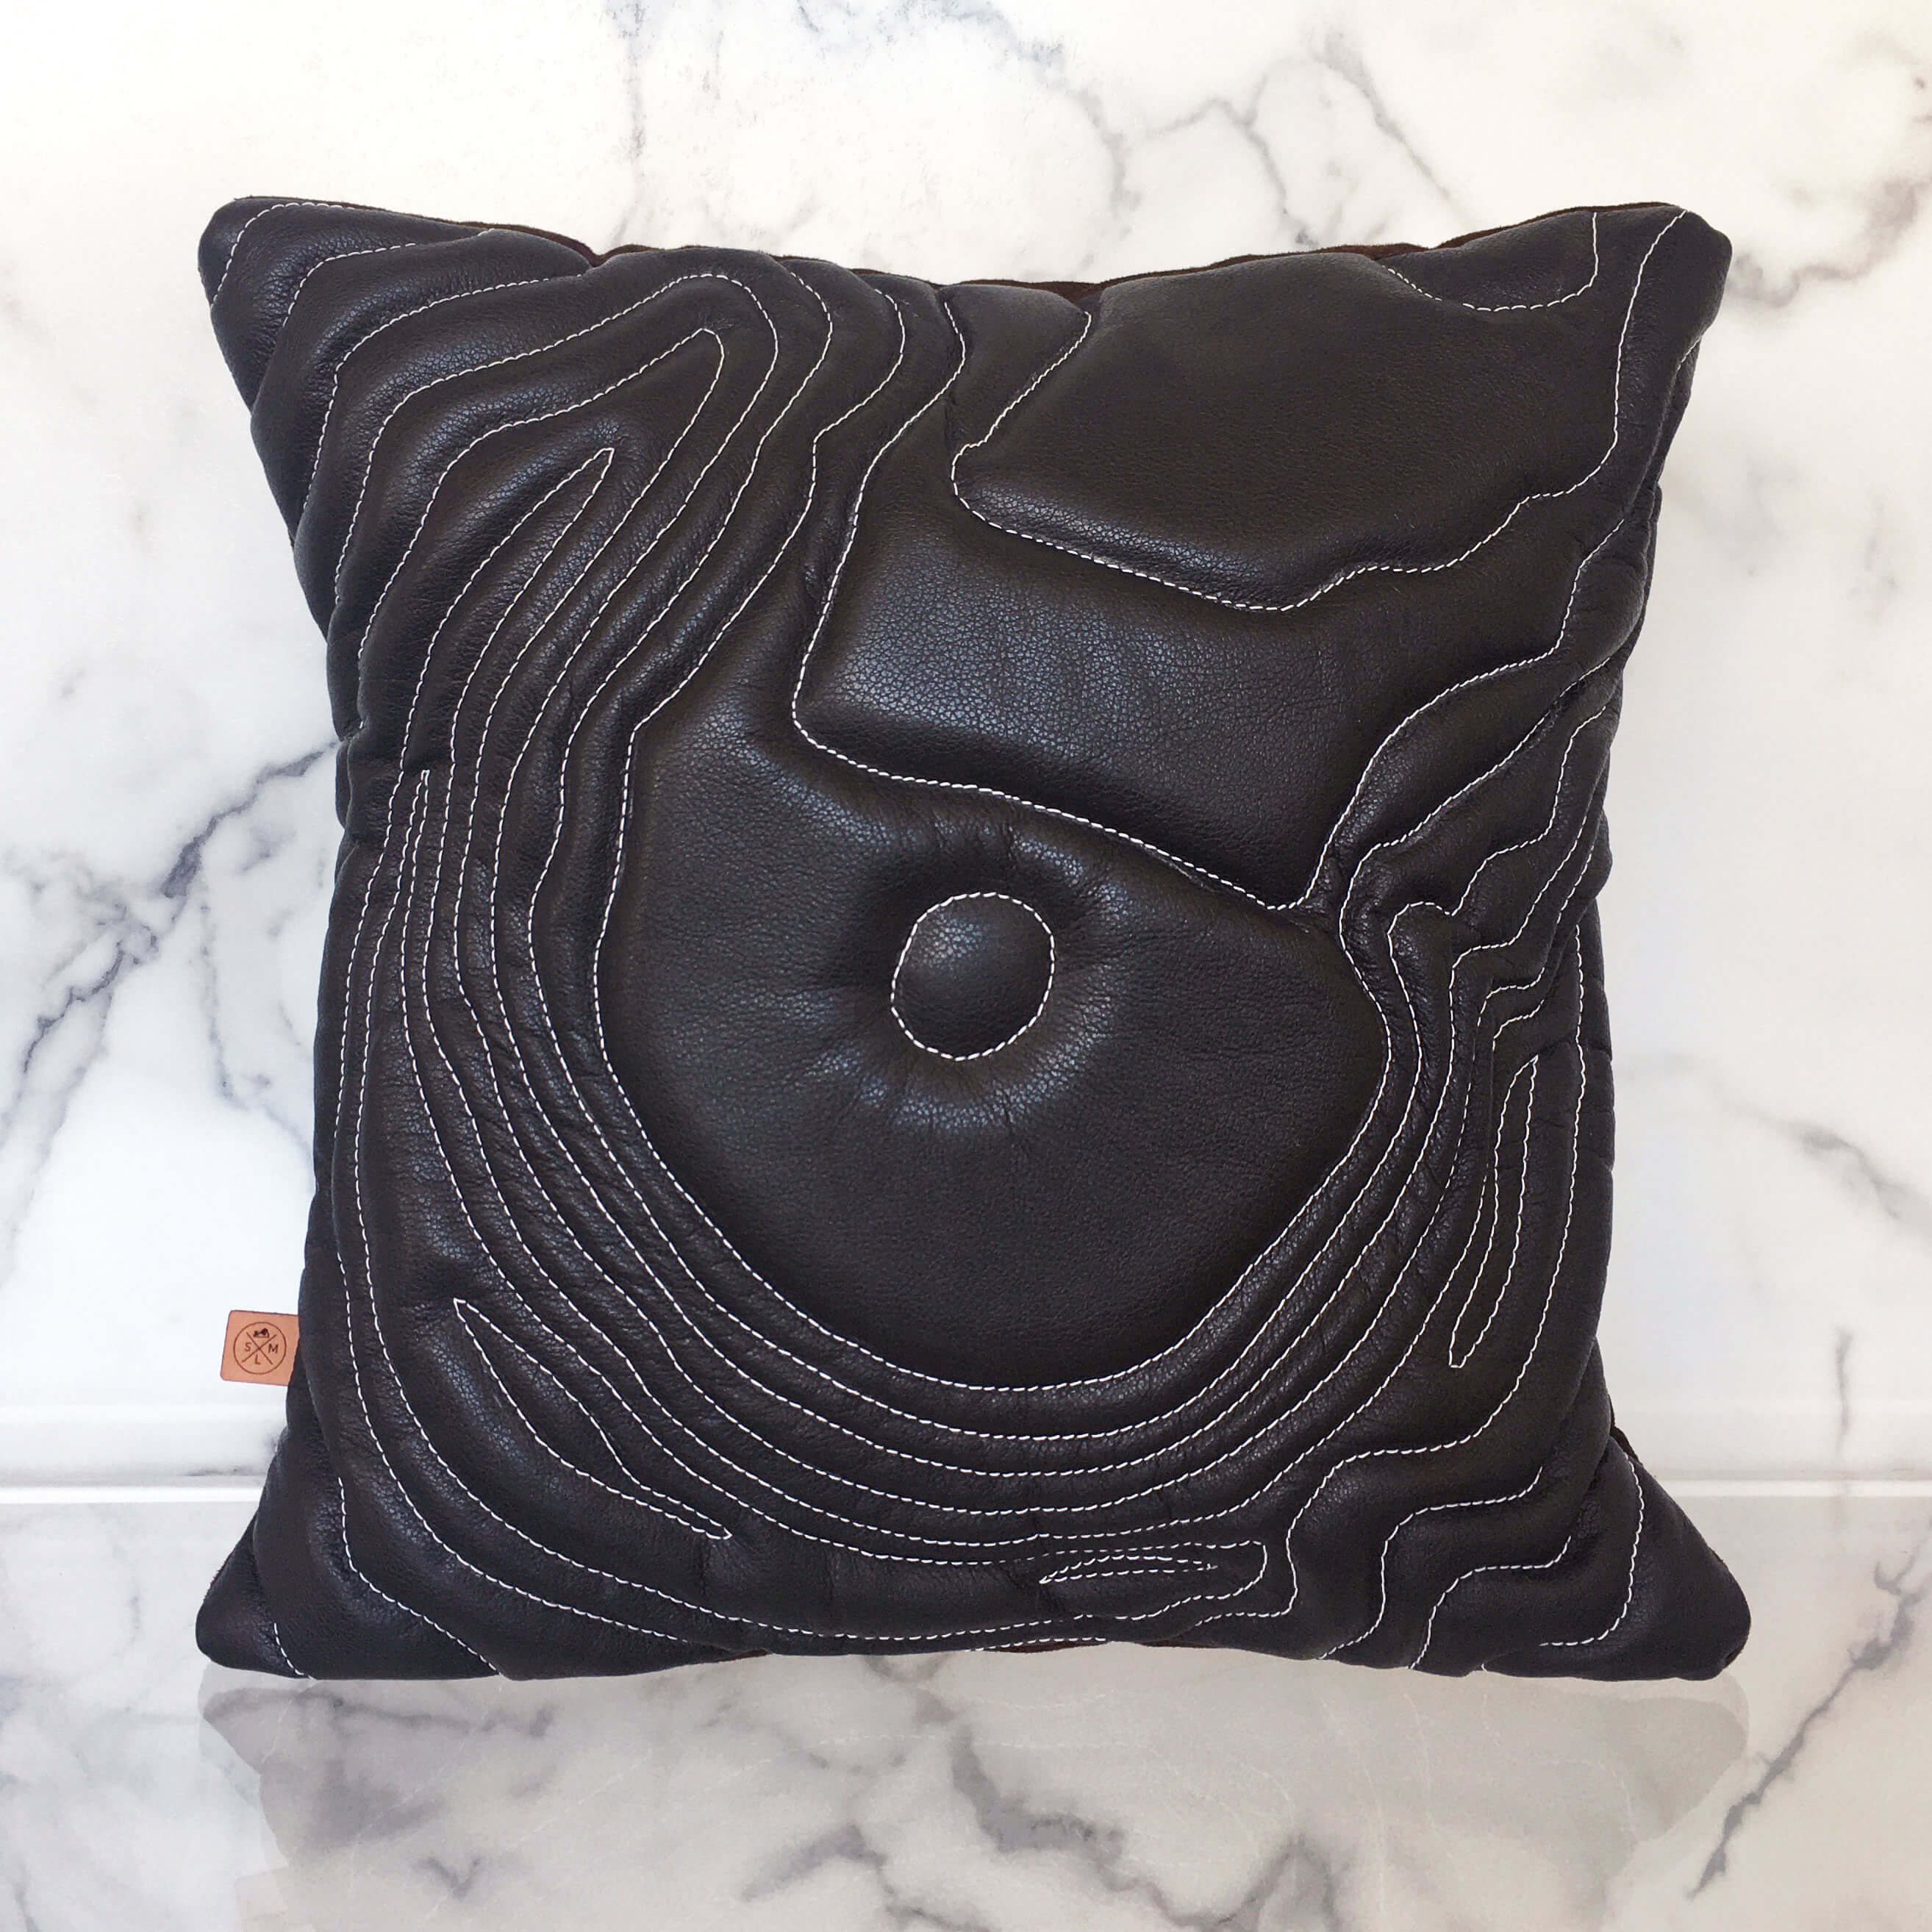 Mt St Helens Topography Pillow - Dark Brown Leather